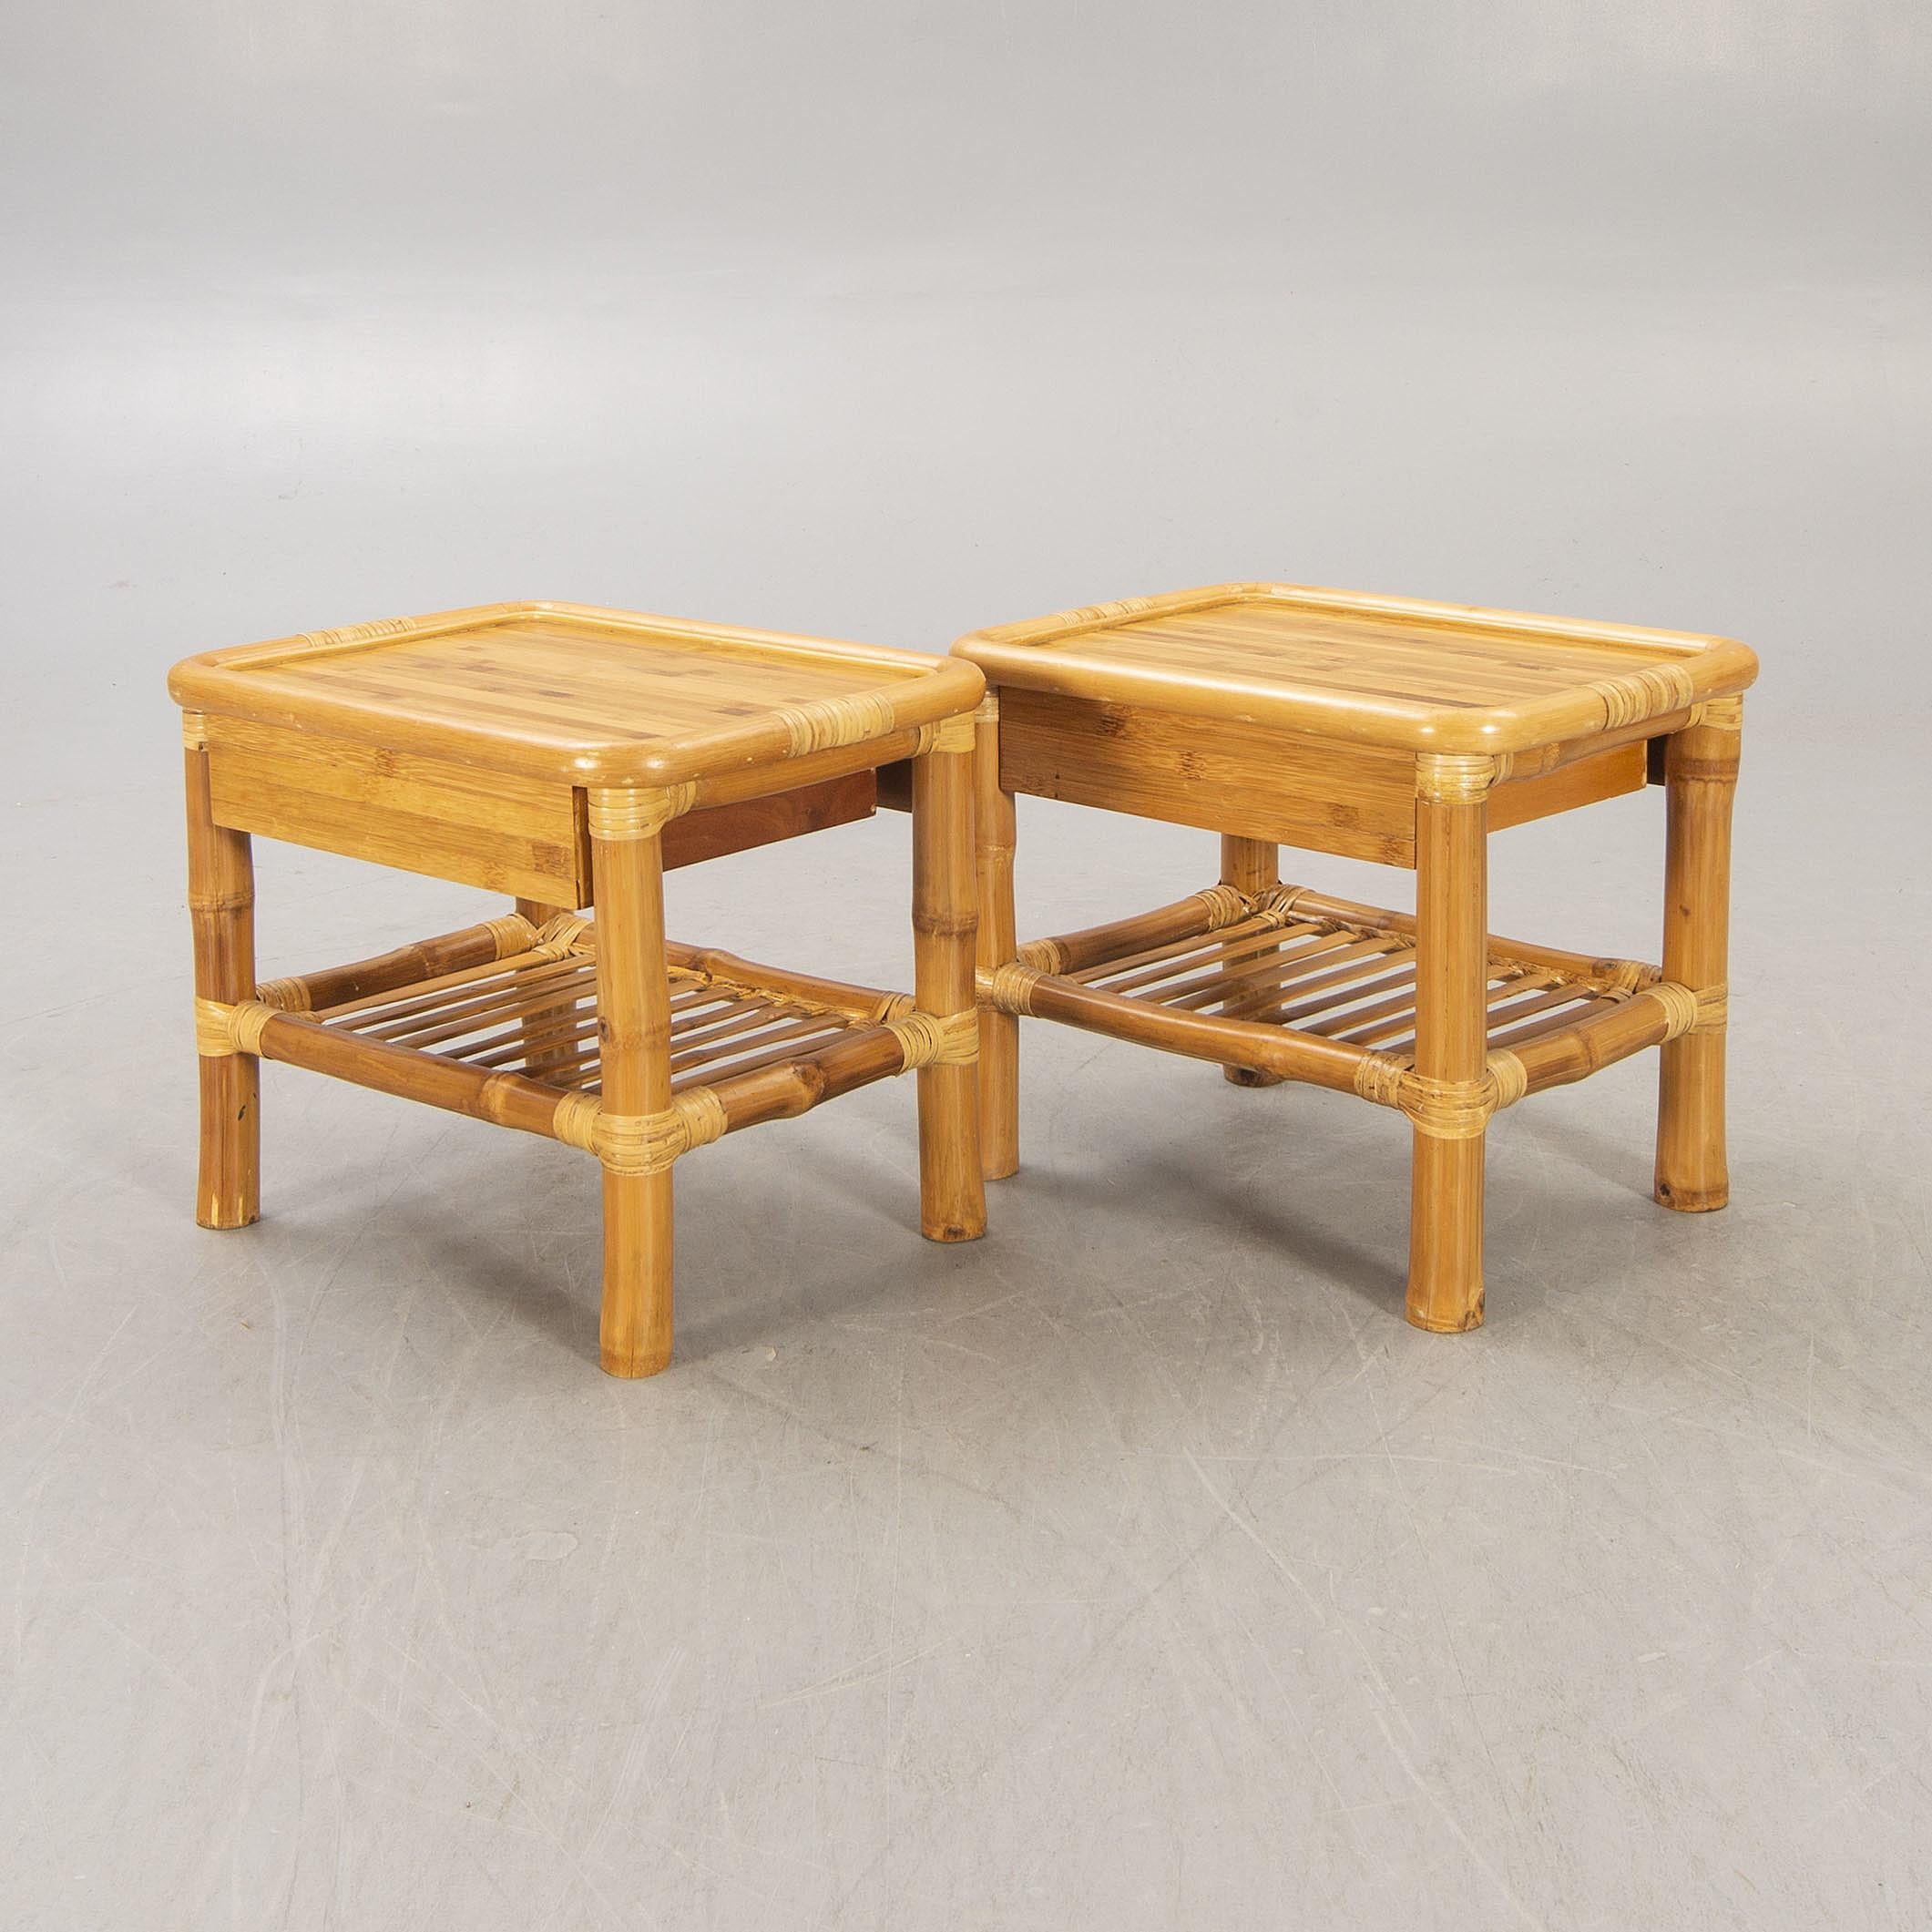 Mid-Century Modern Bamboo and Wood Tables a Pair Probably by DUX, Sweden, 1960 For Sale